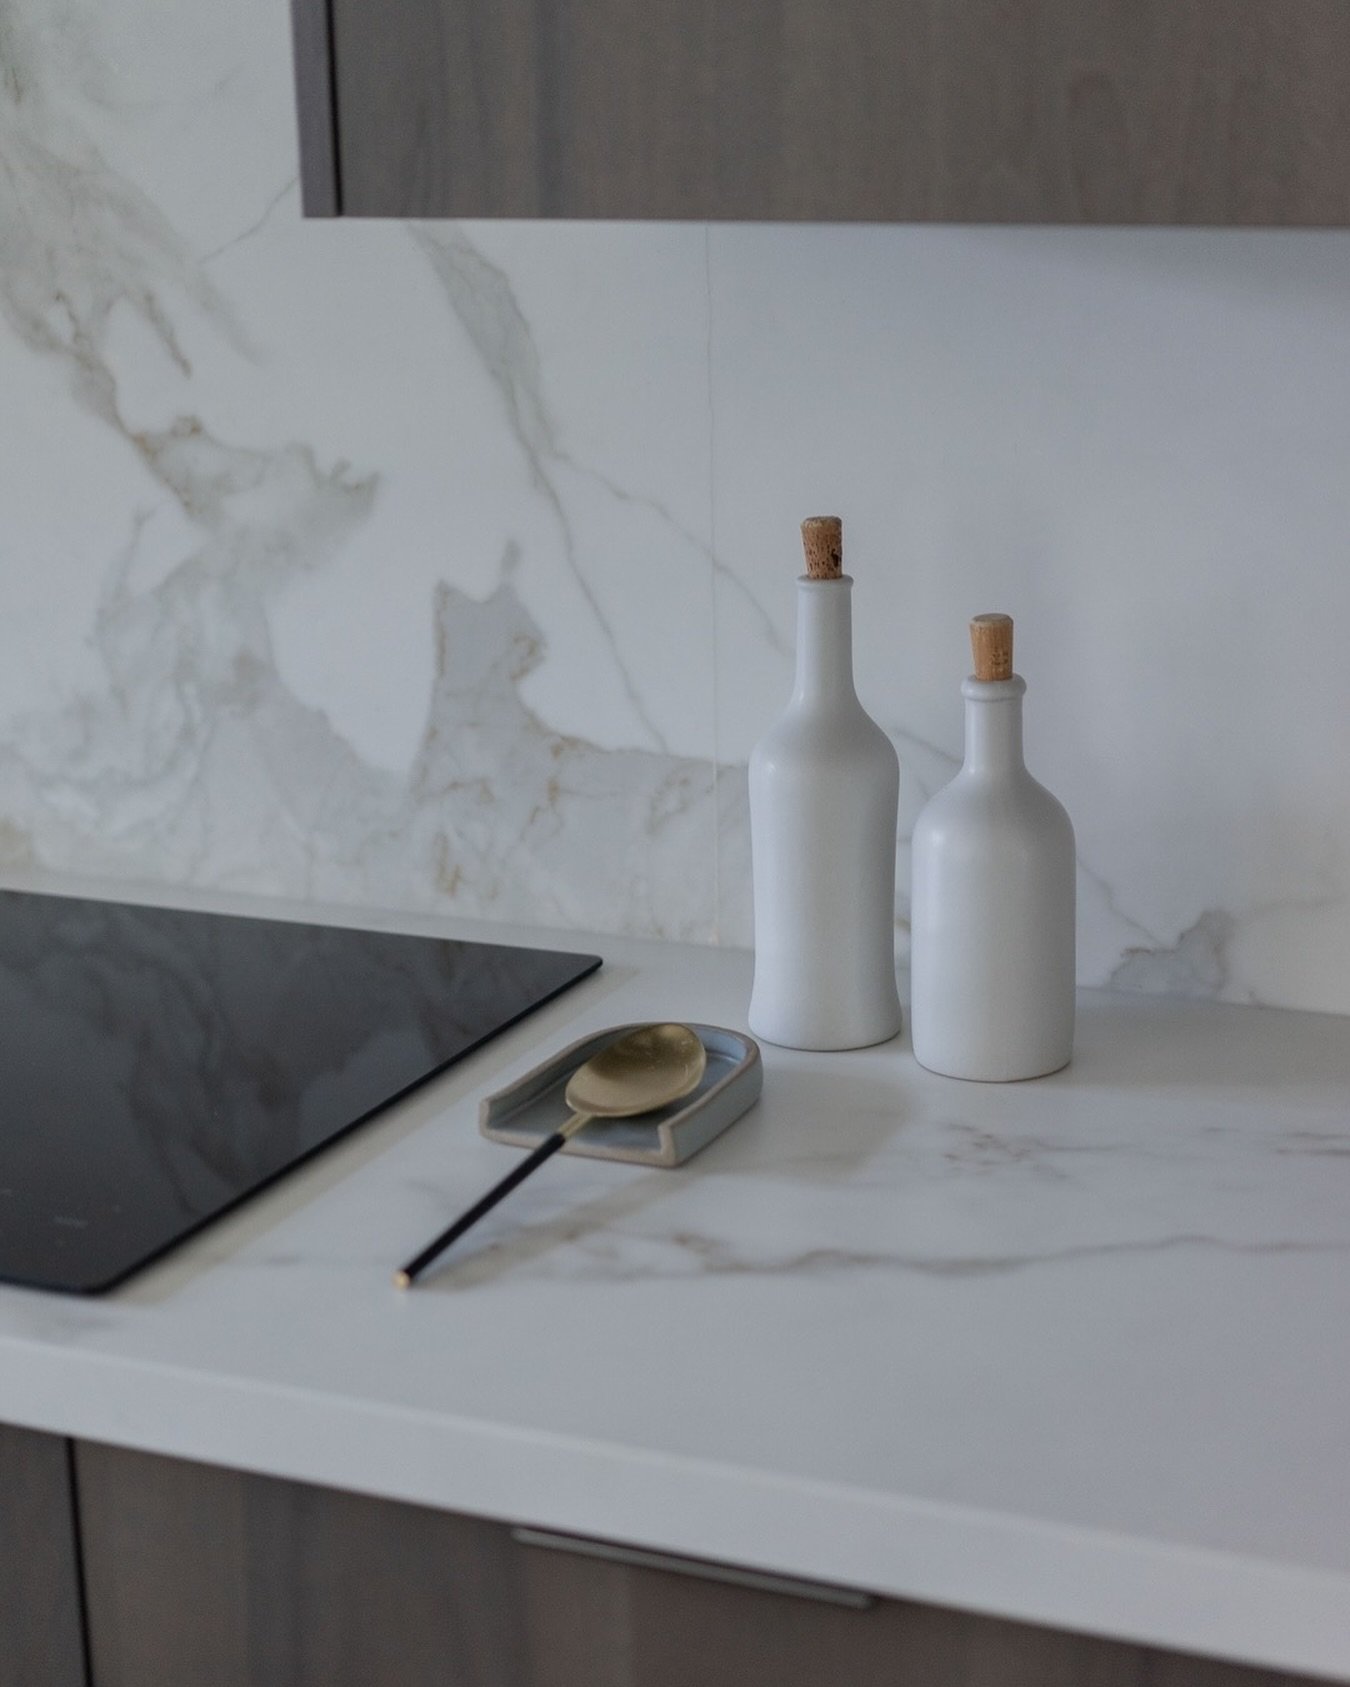 Introducing Neolith in Estatuario Ultrasoft, a stunning sintered stone material that&rsquo;s redefining luxury in our space. 
▶ Crafted from 100% natural raw materials and fused under intense heat and pressure, it offers a sleek, non-porous surface t